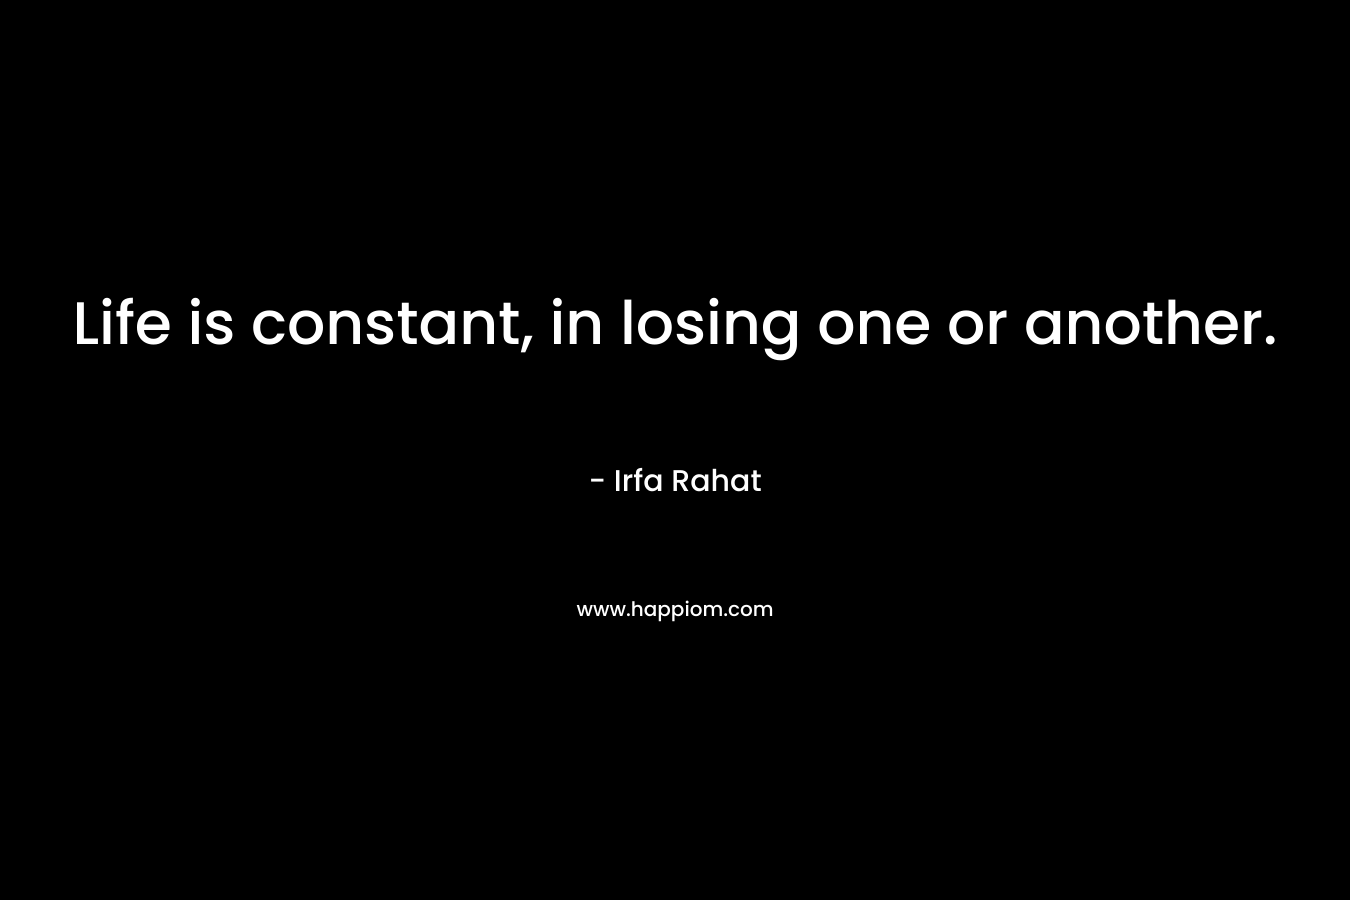 Life is constant, in losing one or another. – Irfa Rahat